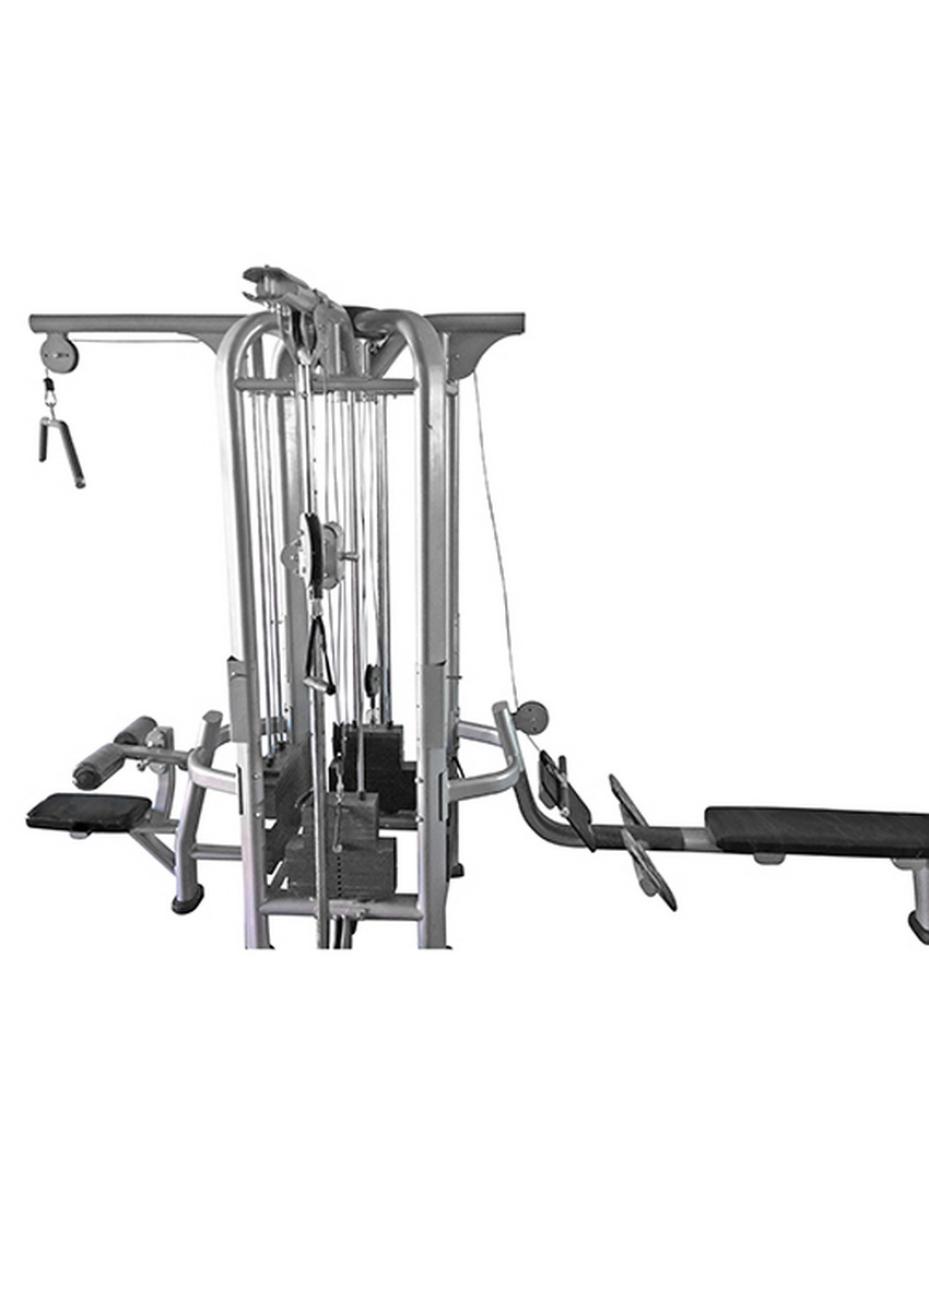 Muscle D Fitness 4 Stack Deluxe Jungle Gym A